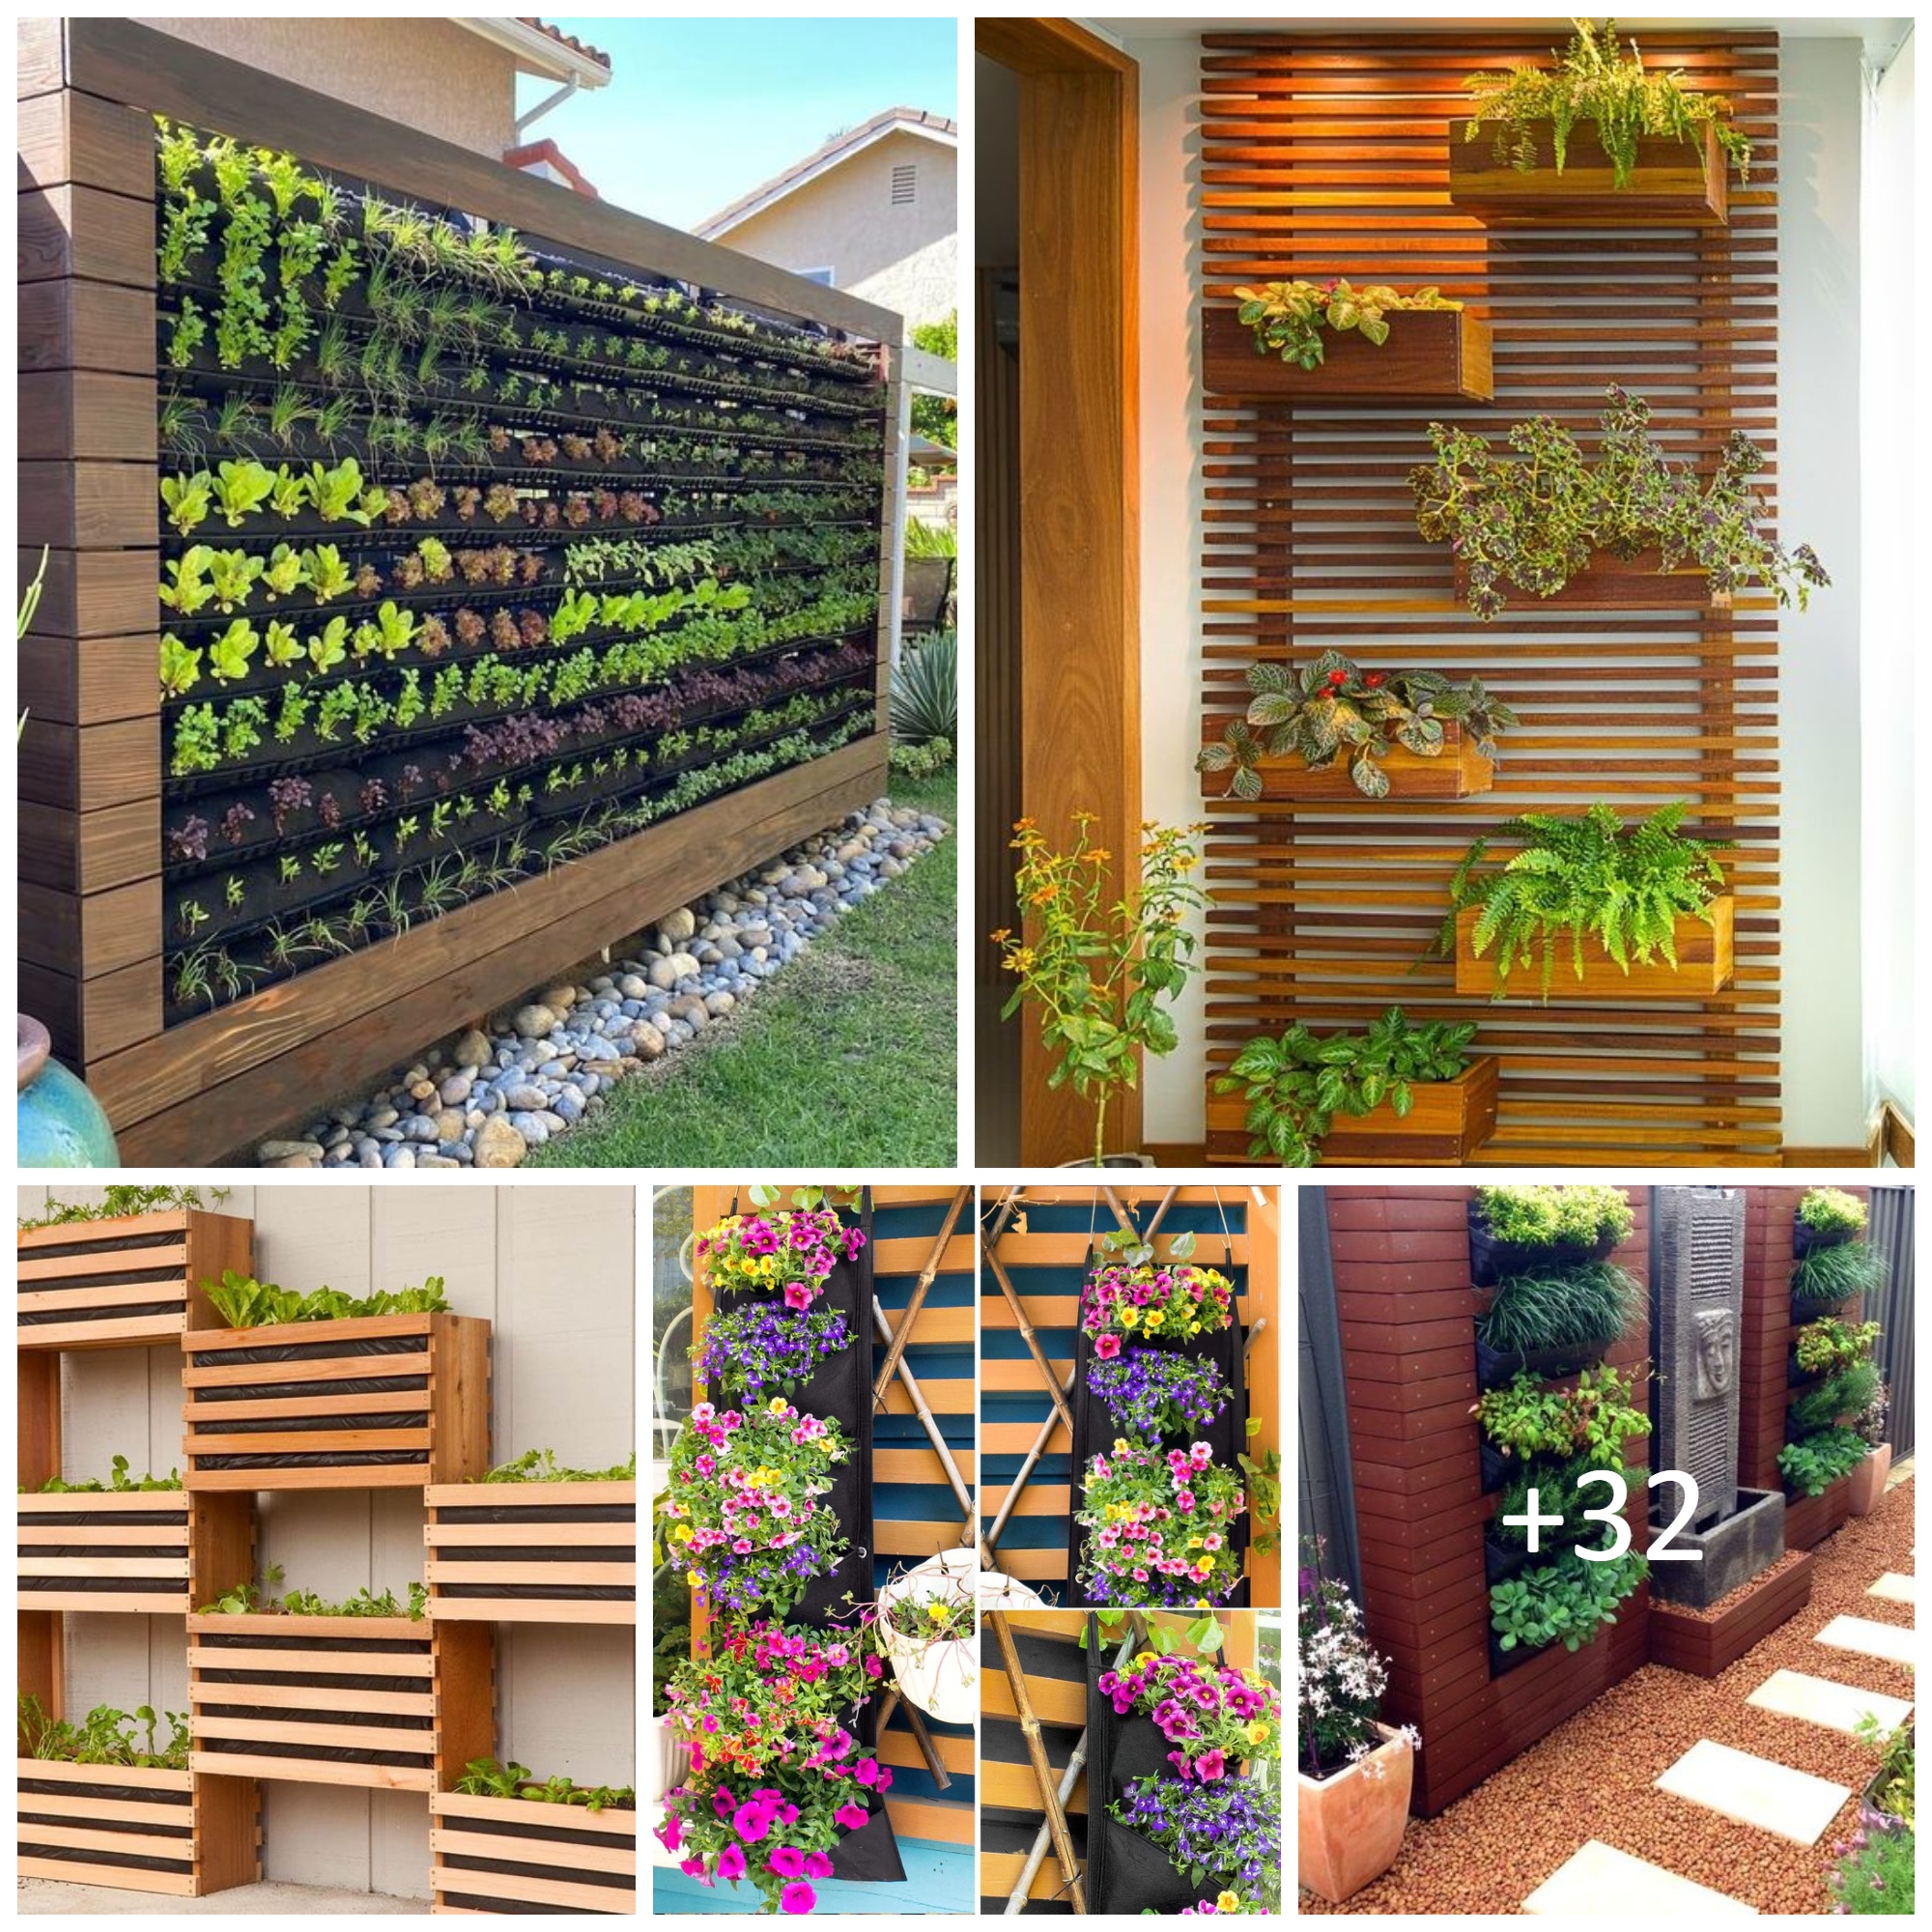 Vertical garden ideas for showing off your favorite houseplants